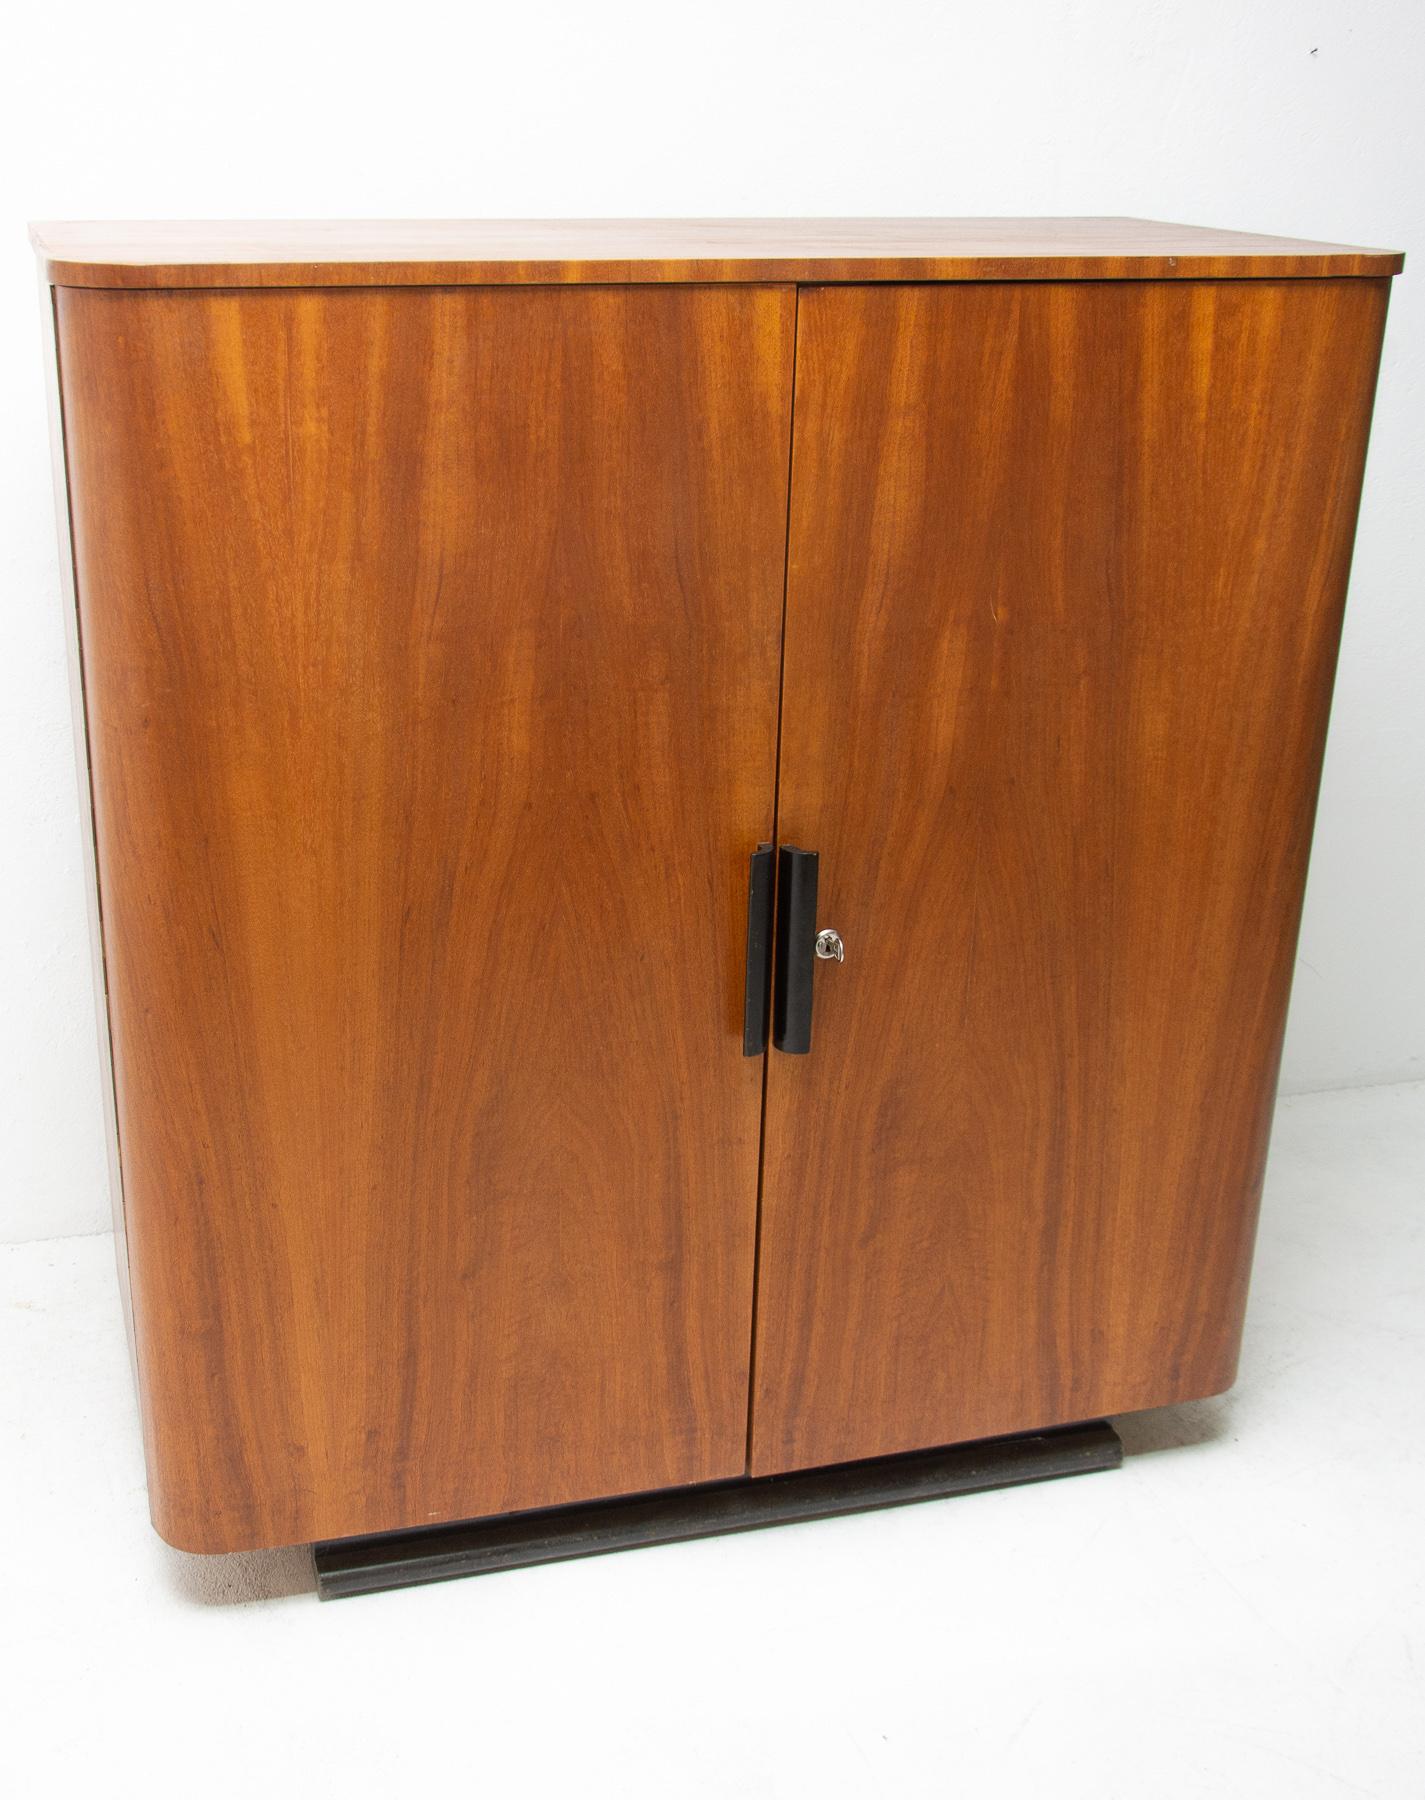 Czech Art Deco or Functionalist Cabinet Designed by Jindřich Halabala for UP Závody